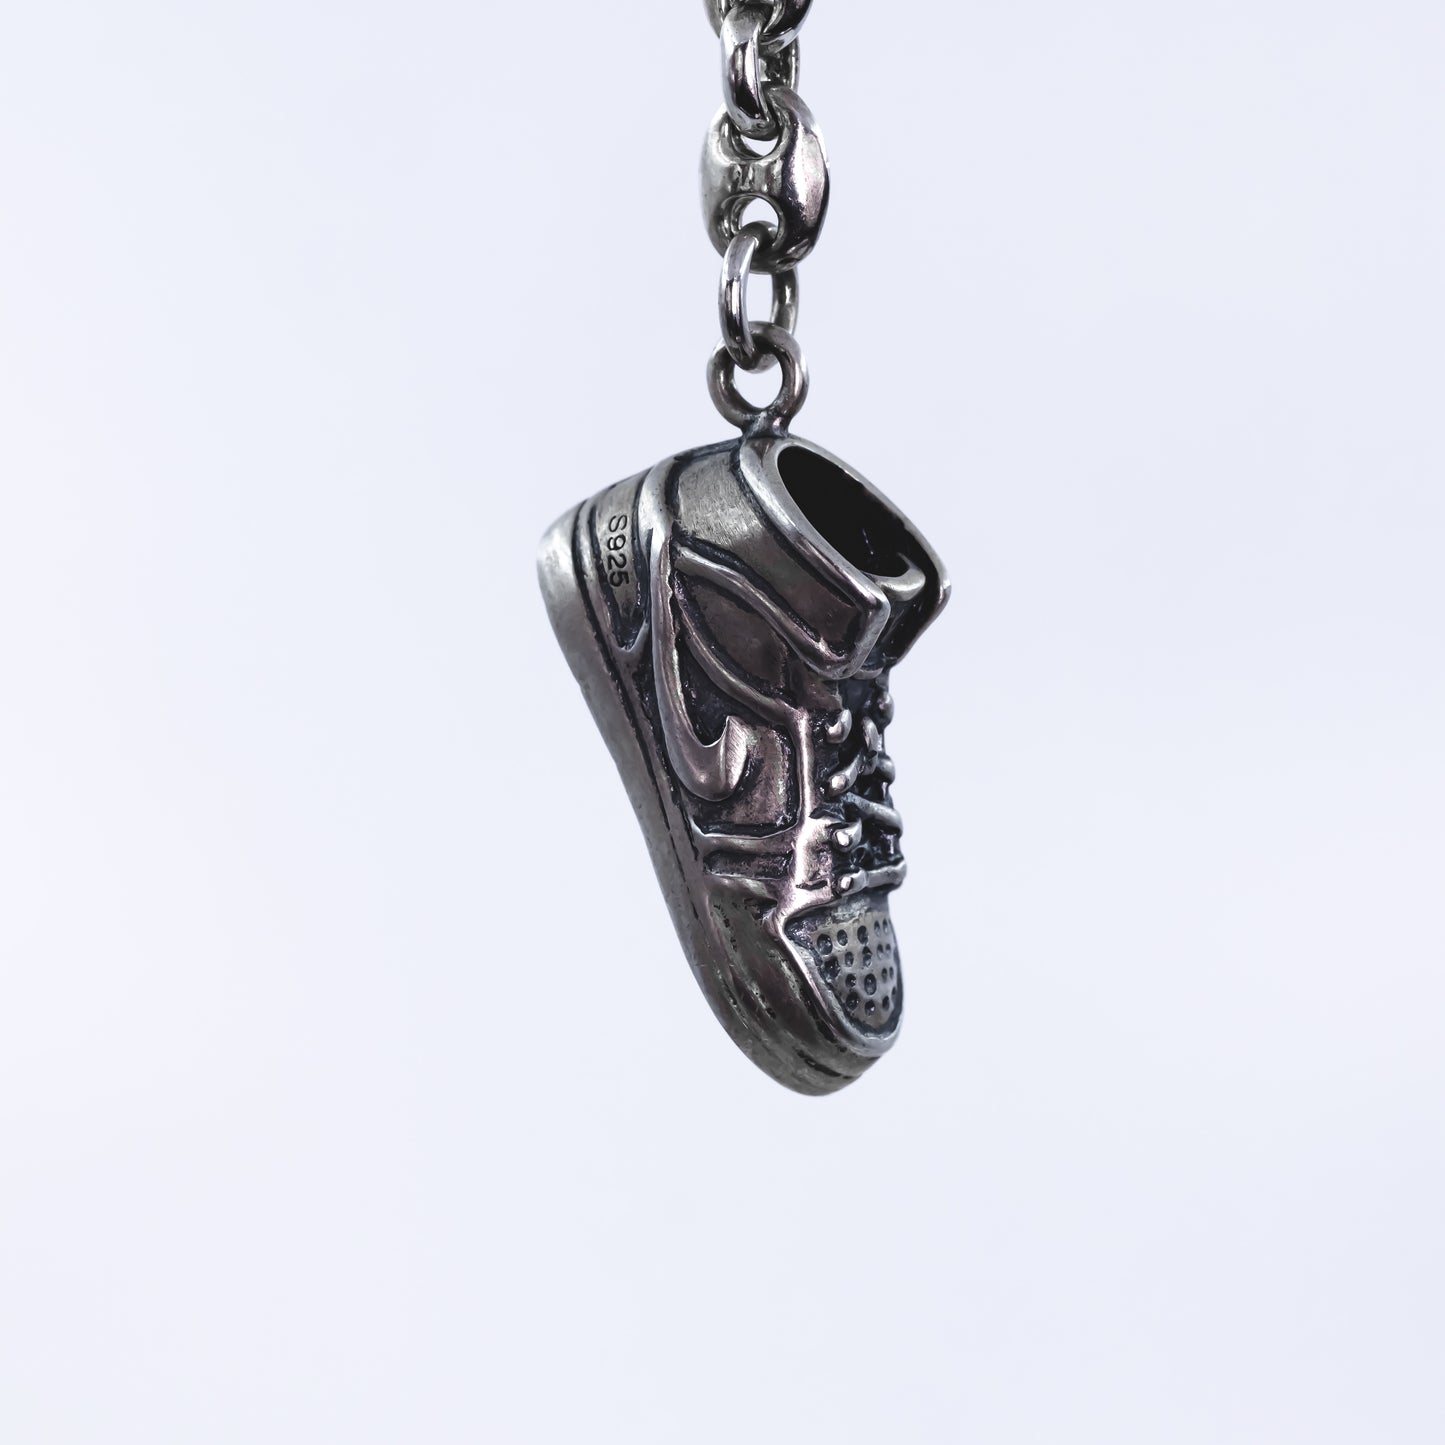 Sole Reflections: Silver solid Vintage shoe keychain.